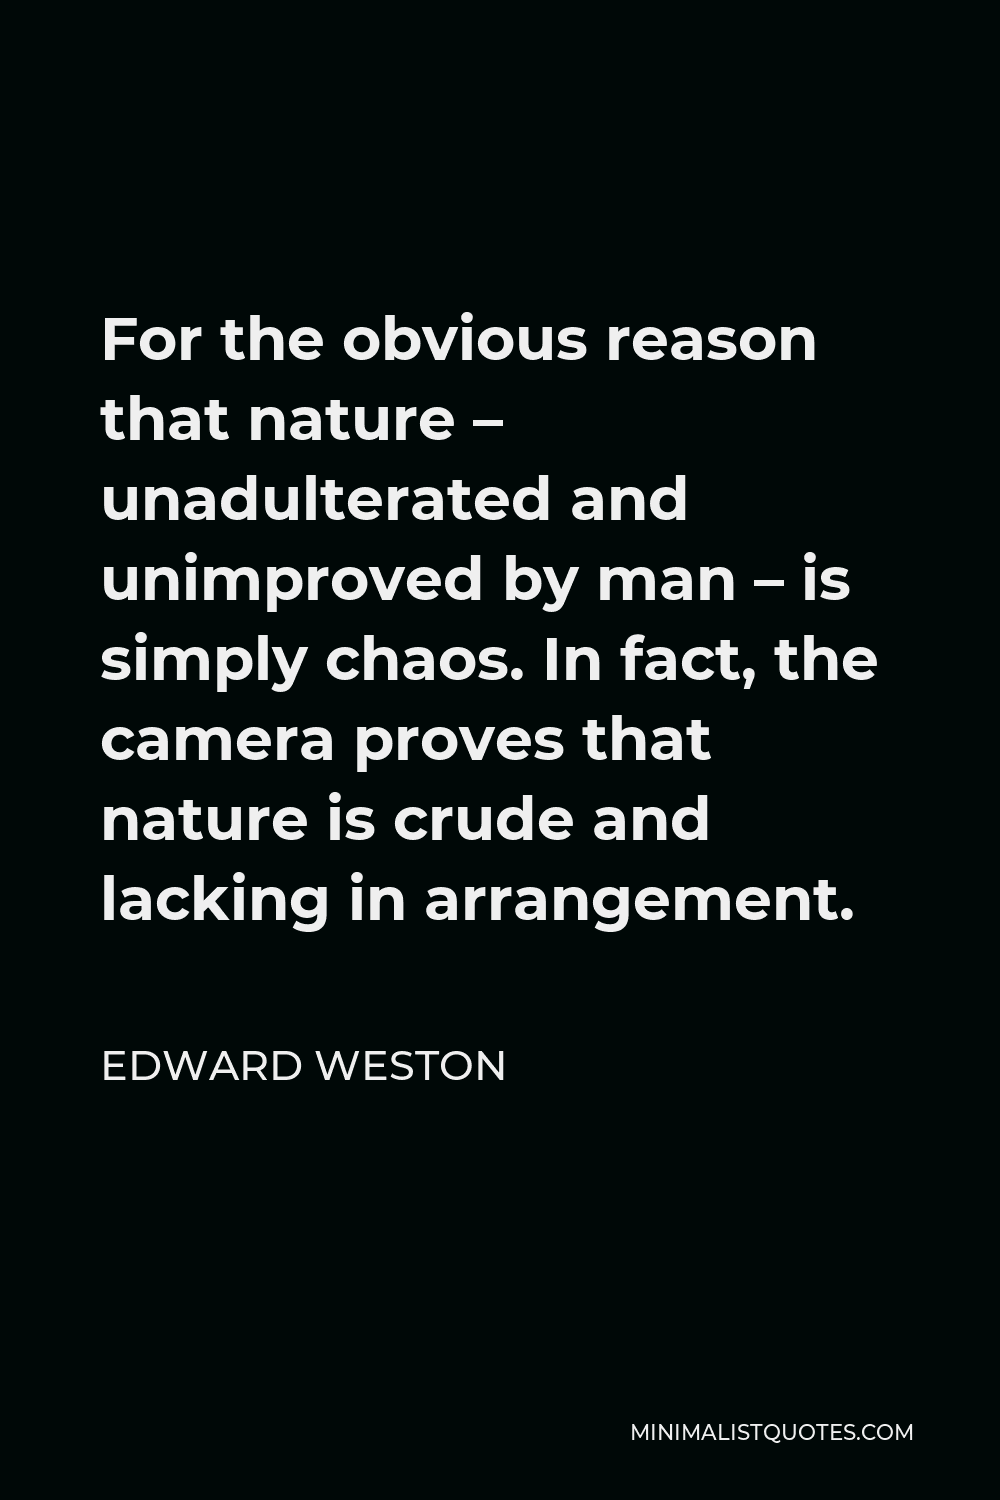 Edward Weston Quote - For the obvious reason that nature – unadulterated and unimproved by man – is simply chaos. In fact, the camera proves that nature is crude and lacking in arrangement.